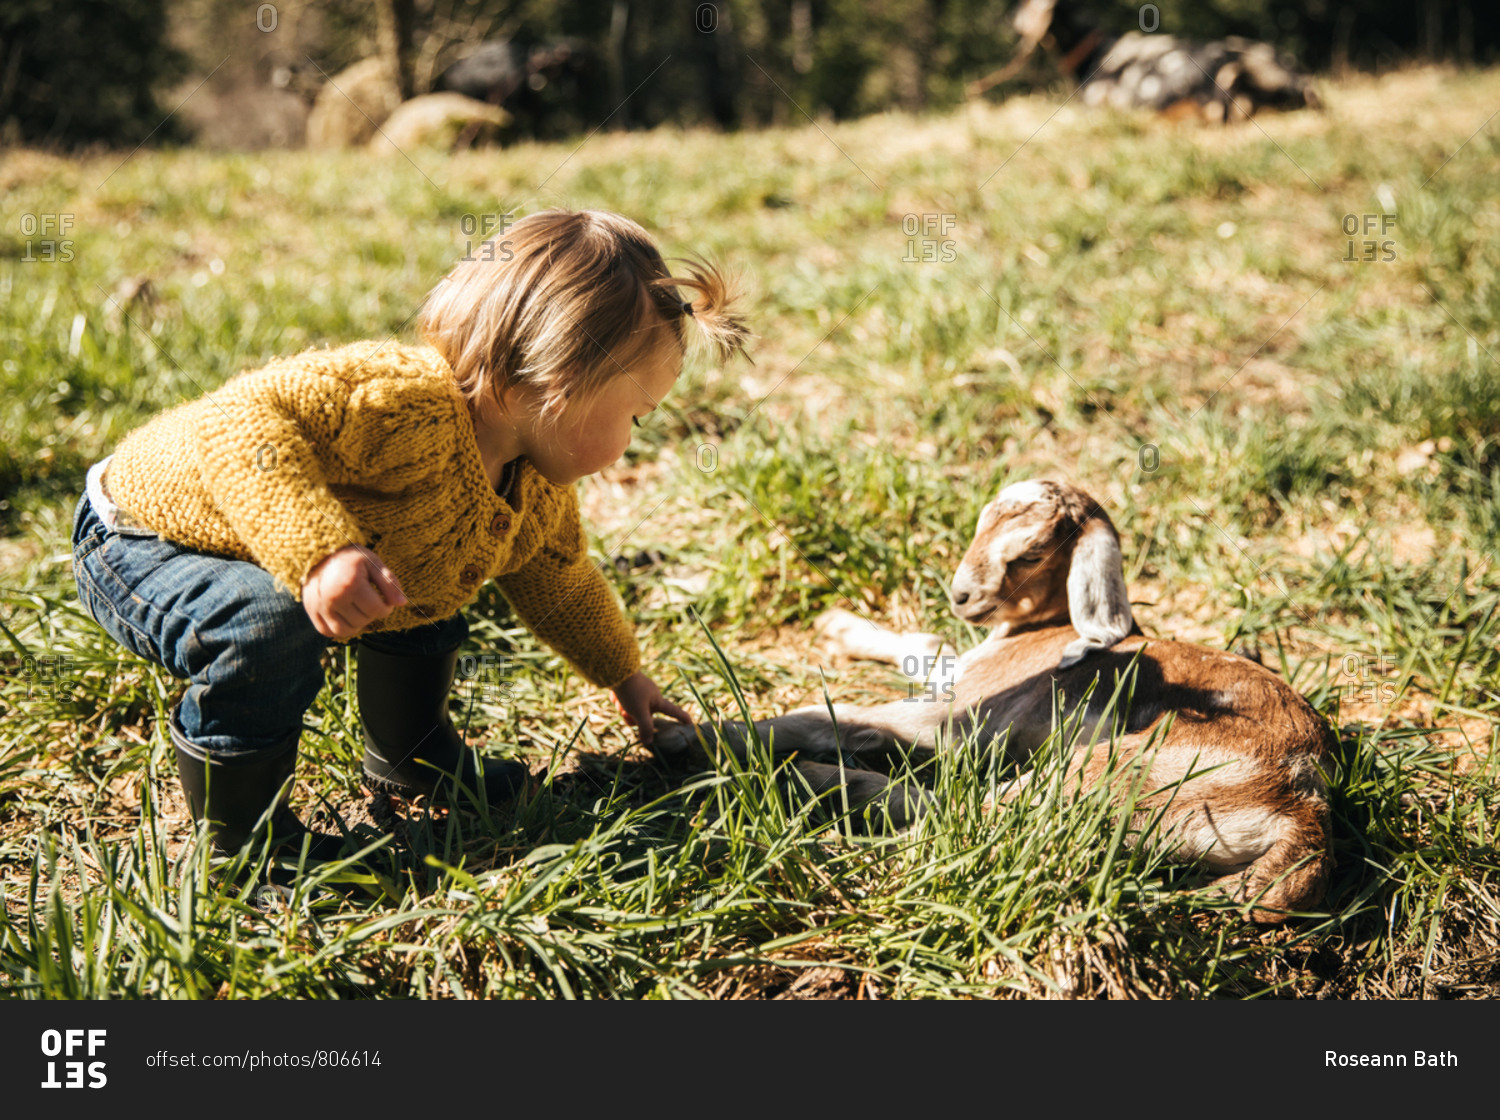 Toddler girl leaning over a baby goat.